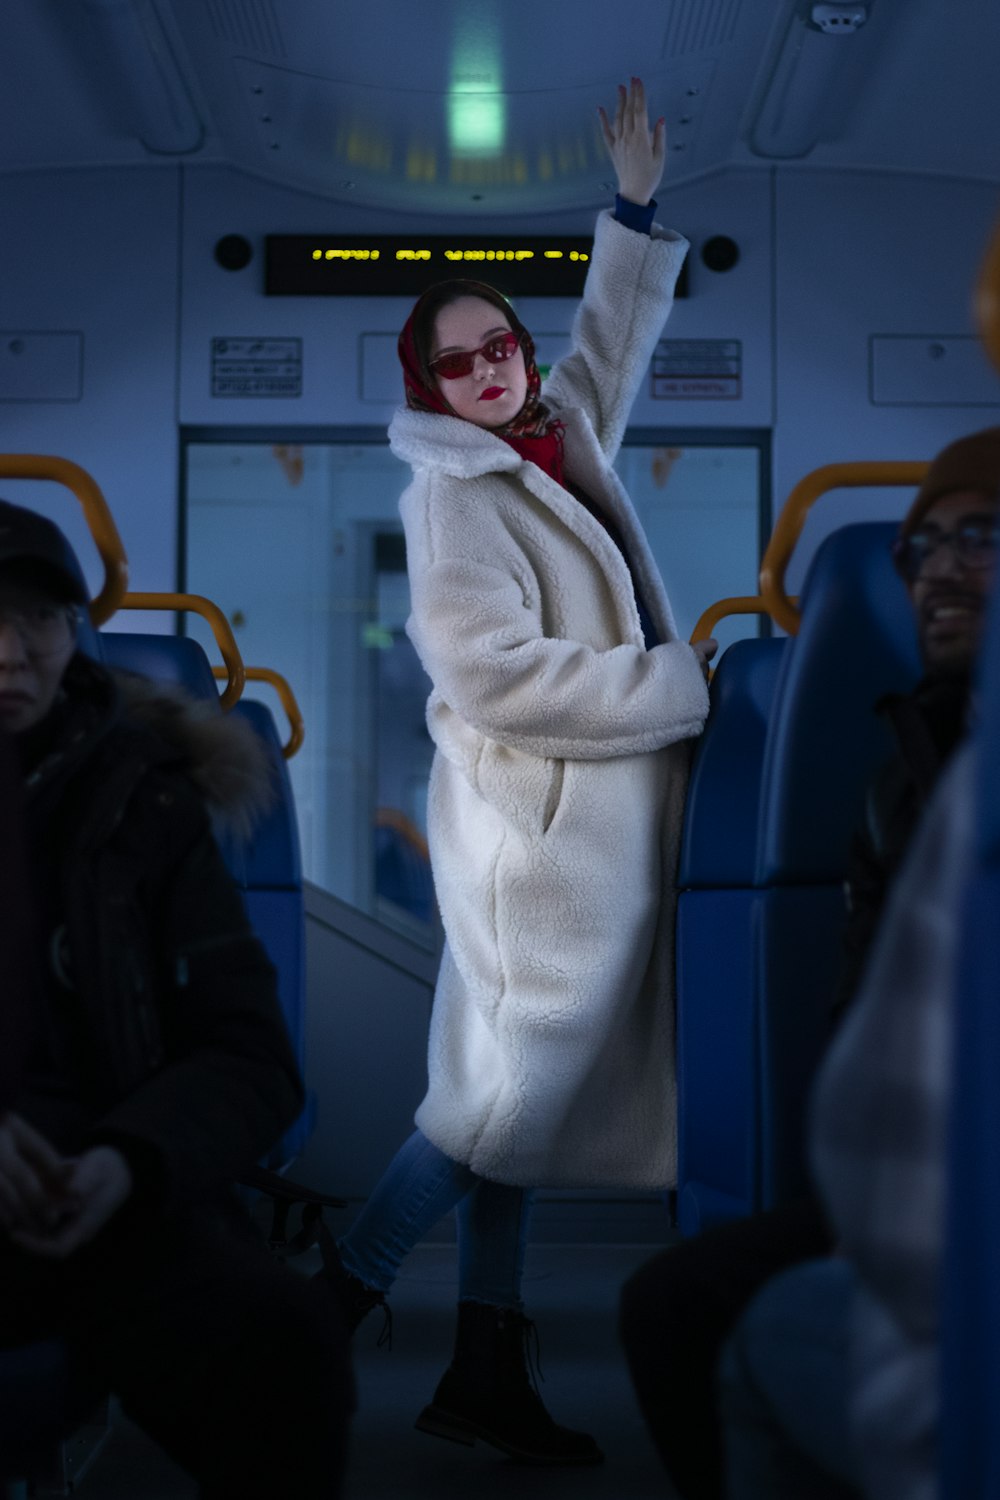 a woman in a white coat waving on a bus